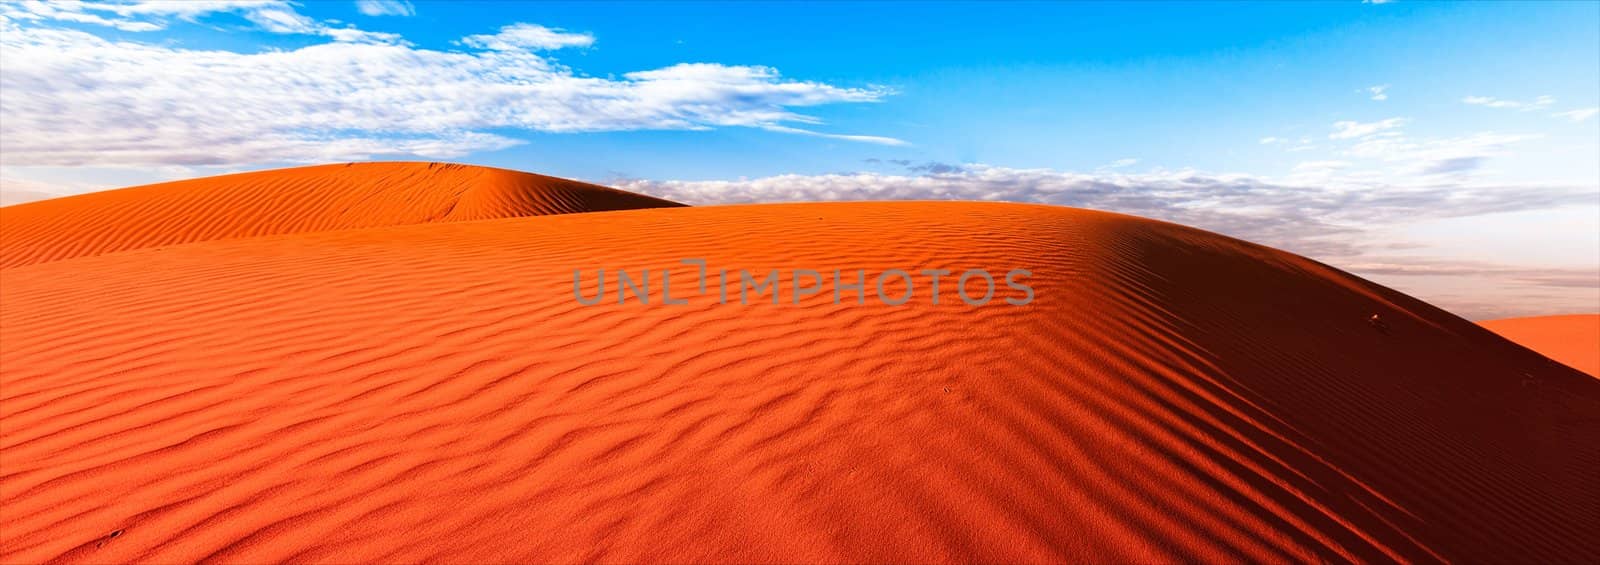 Red sand dune with ripple and blue sky by hangingpixels